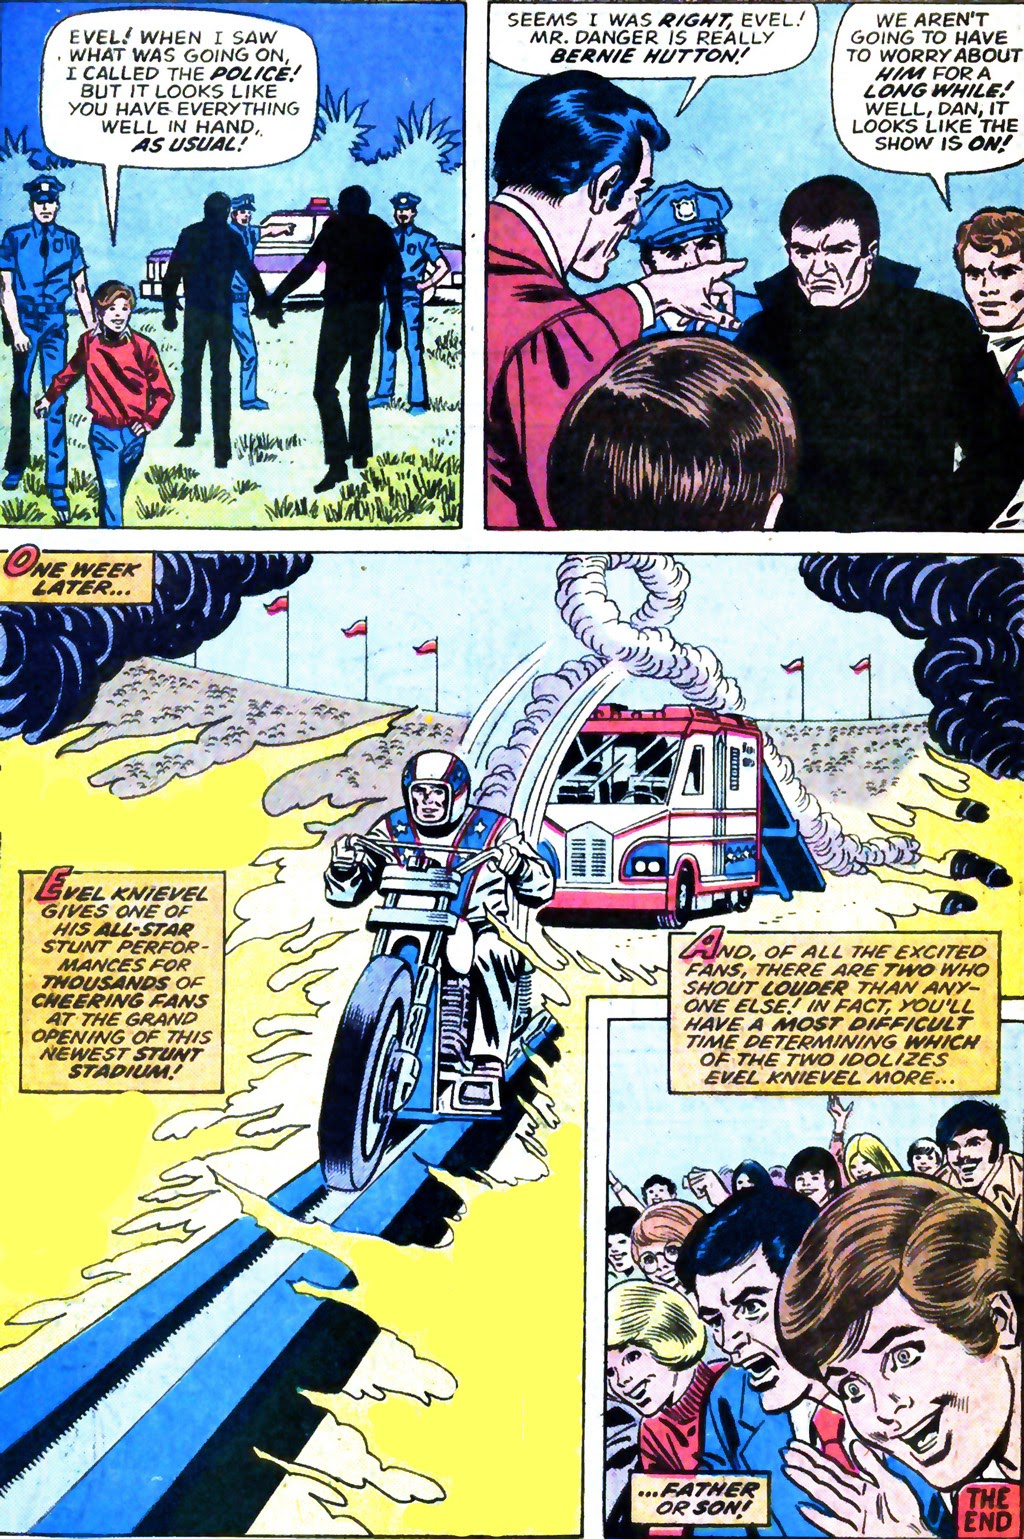 Read online Evel Knievel comic -  Issue # Full - 18